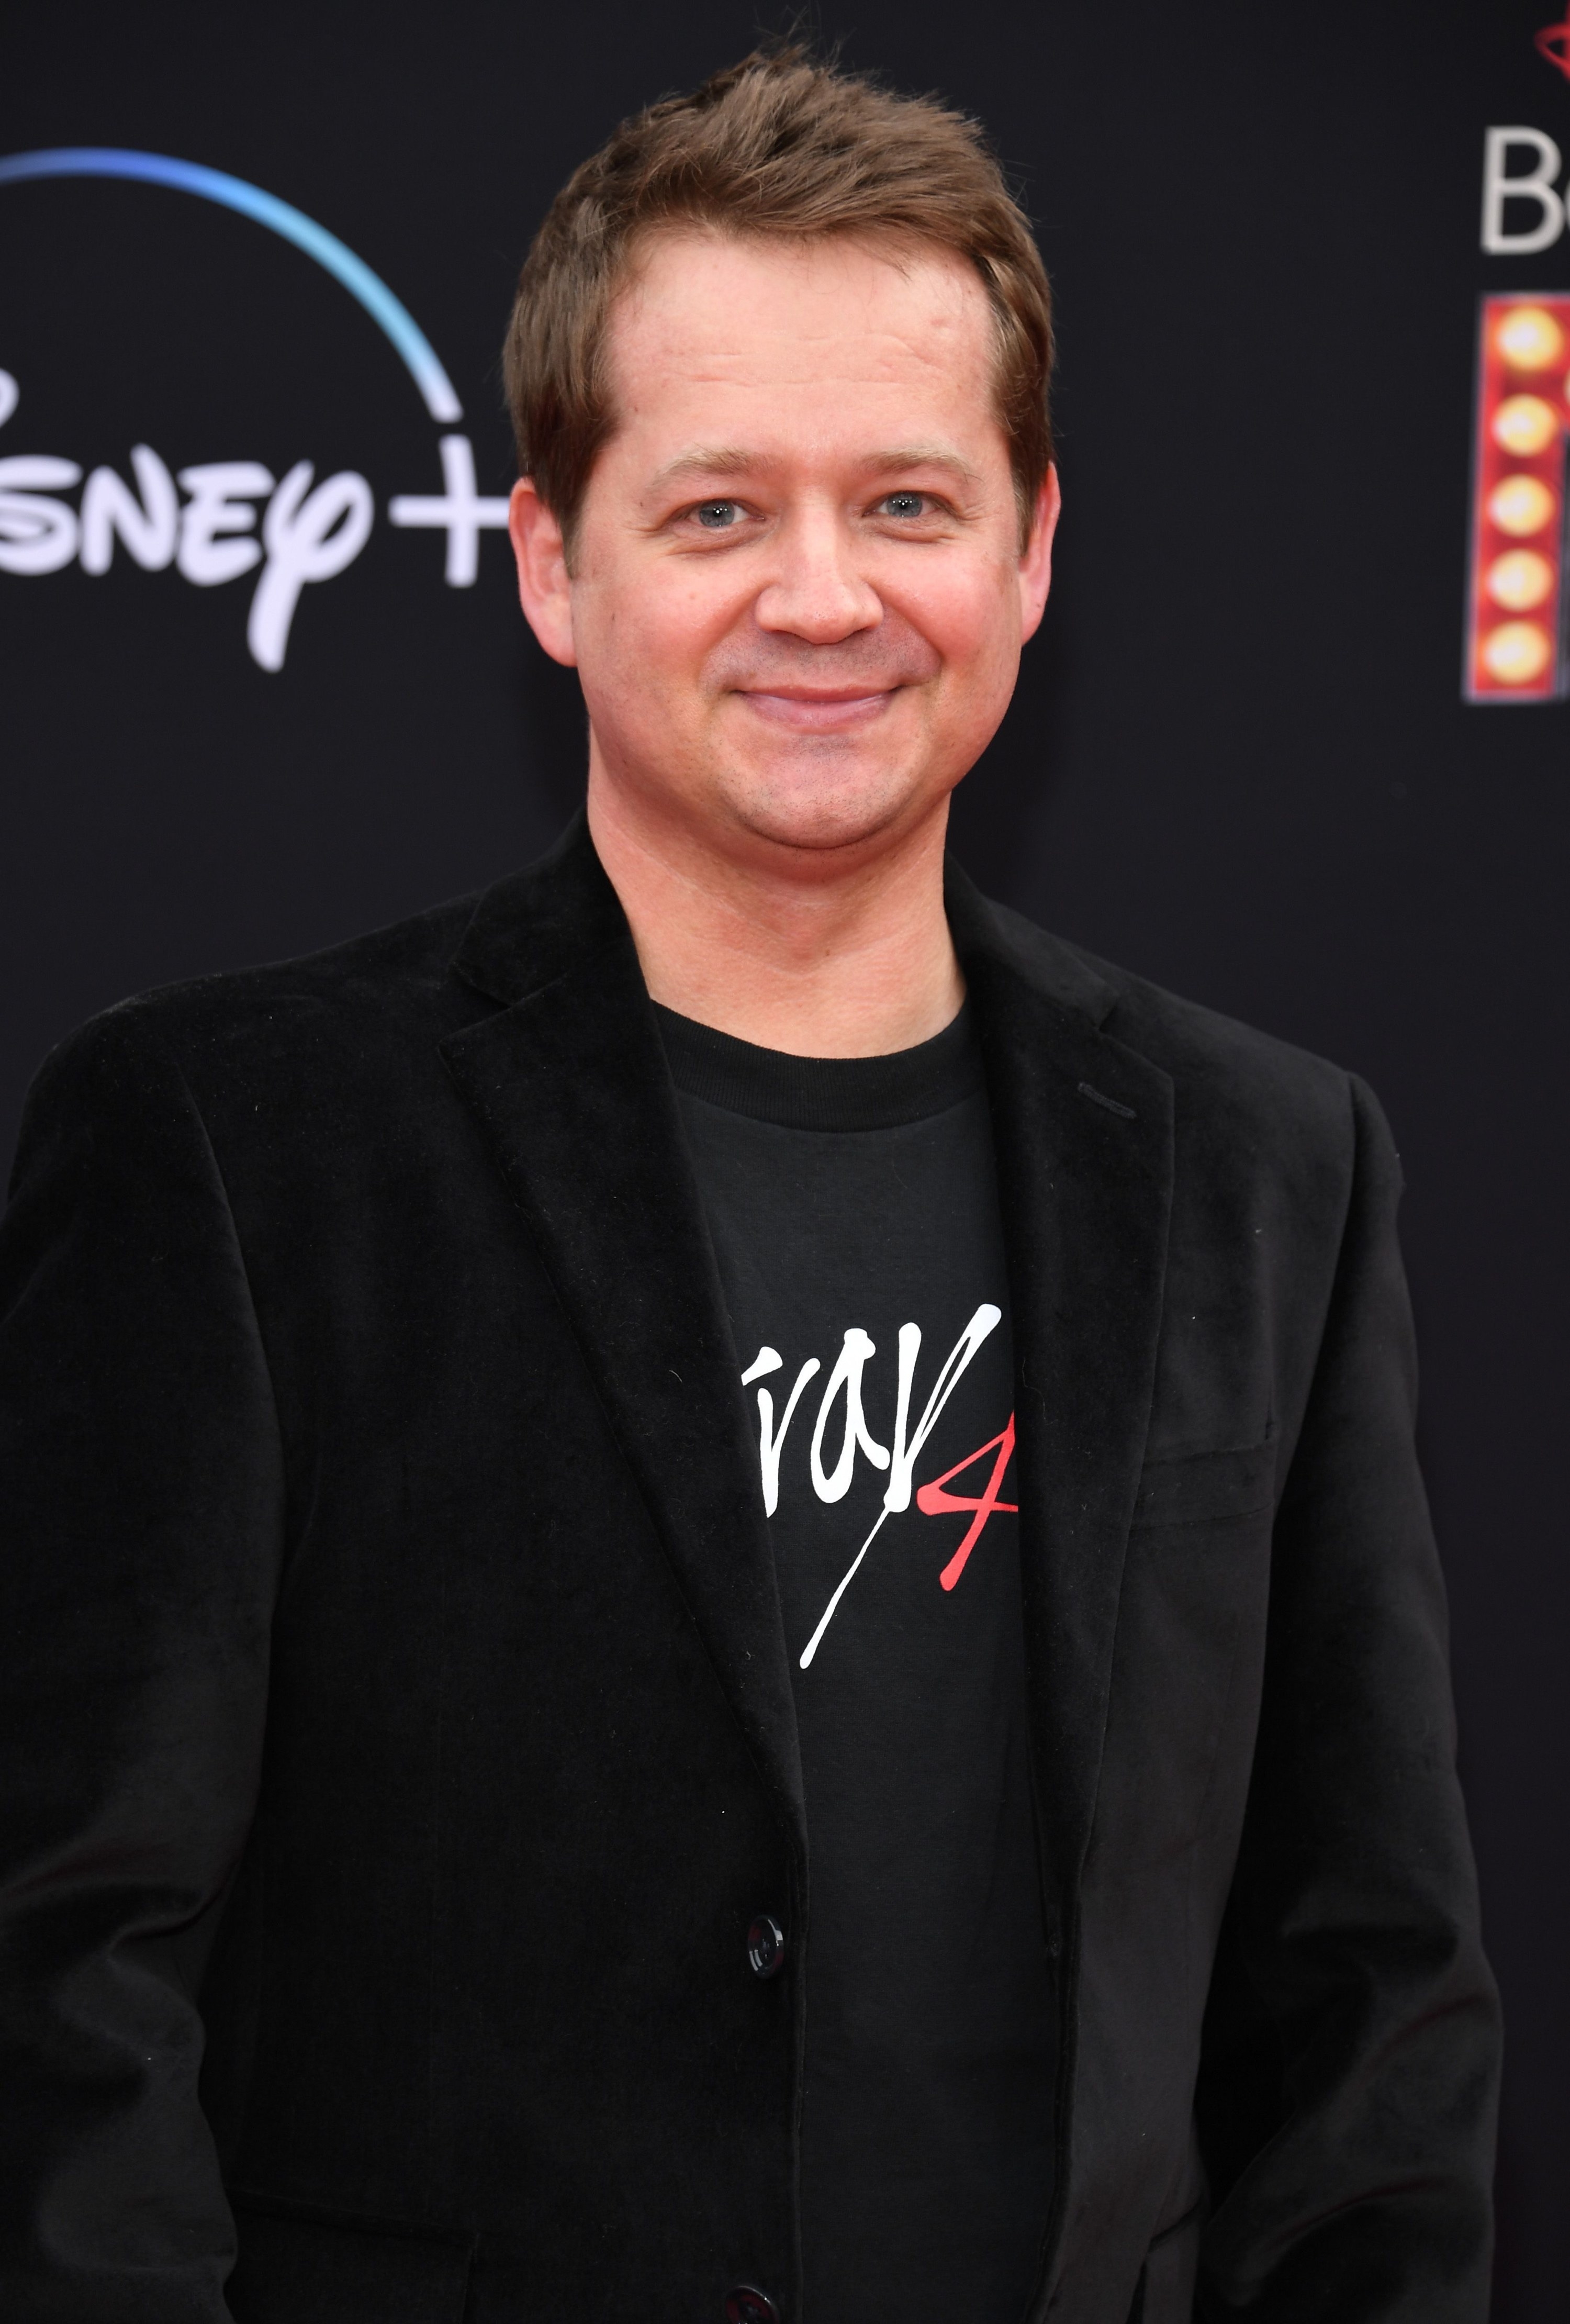 A smiling, clean-shaven Jason in a jacket and T-shirt